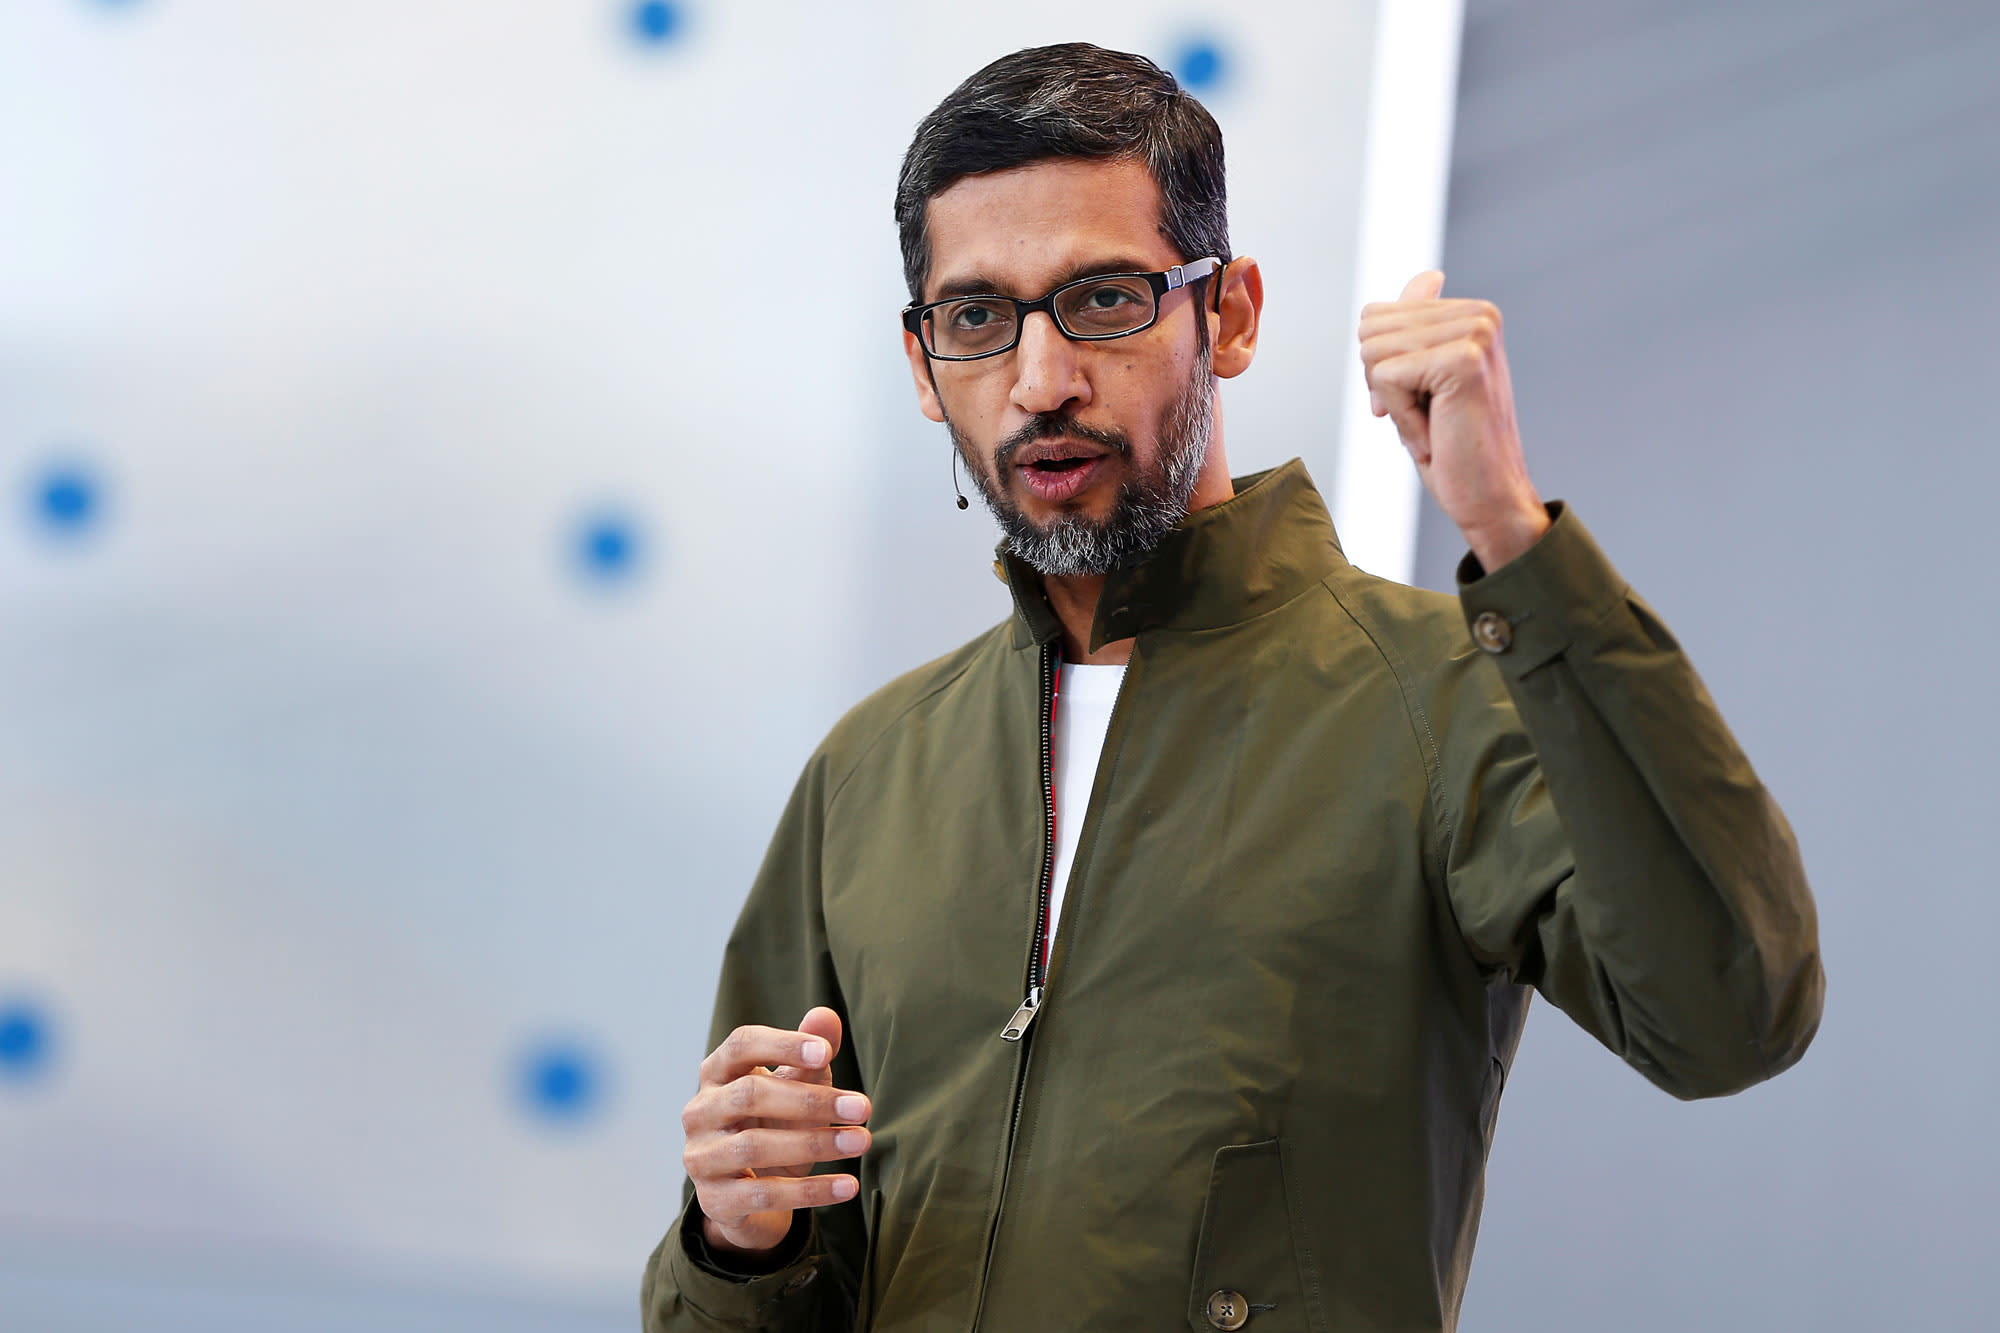 Google will spend $ 7 billion on data centers and office space in 2021